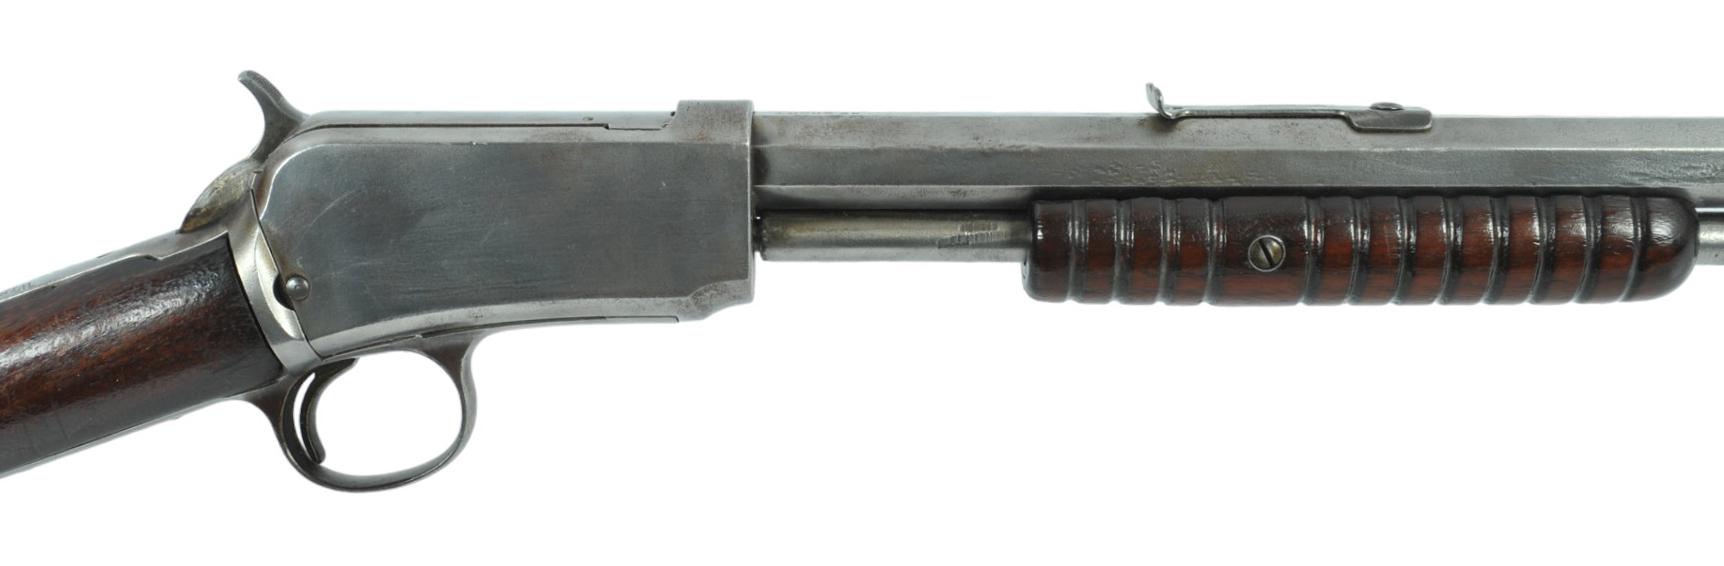 Winchester Model 1890 .22 Short Pump-action Rifle FFL Required: 144654  (RSO1)